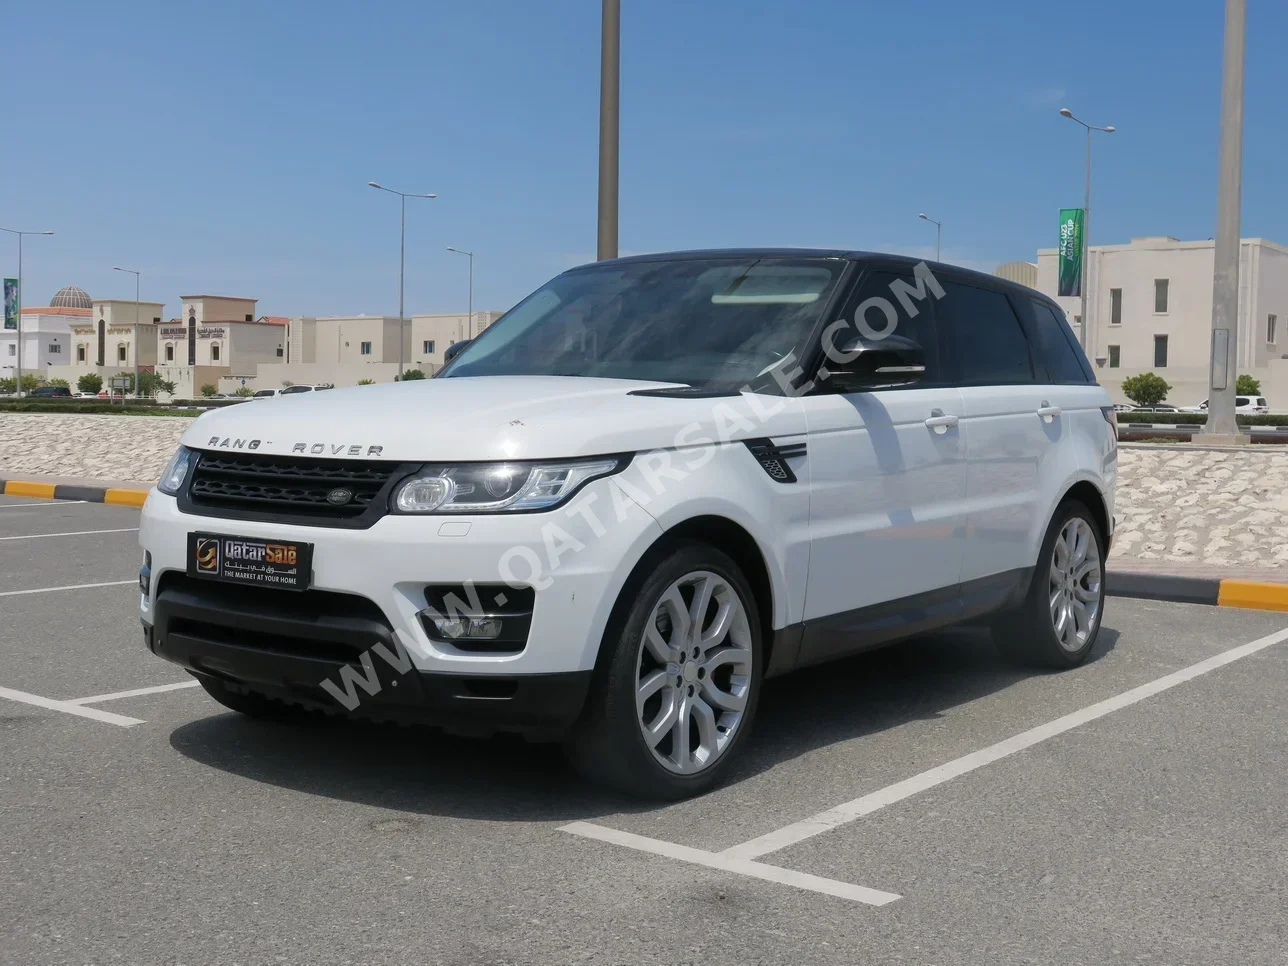 Land Rover  Range Rover  Sport  2015  Automatic  160,000 Km  8 Cylinder  Four Wheel Drive (4WD)  SUV  White